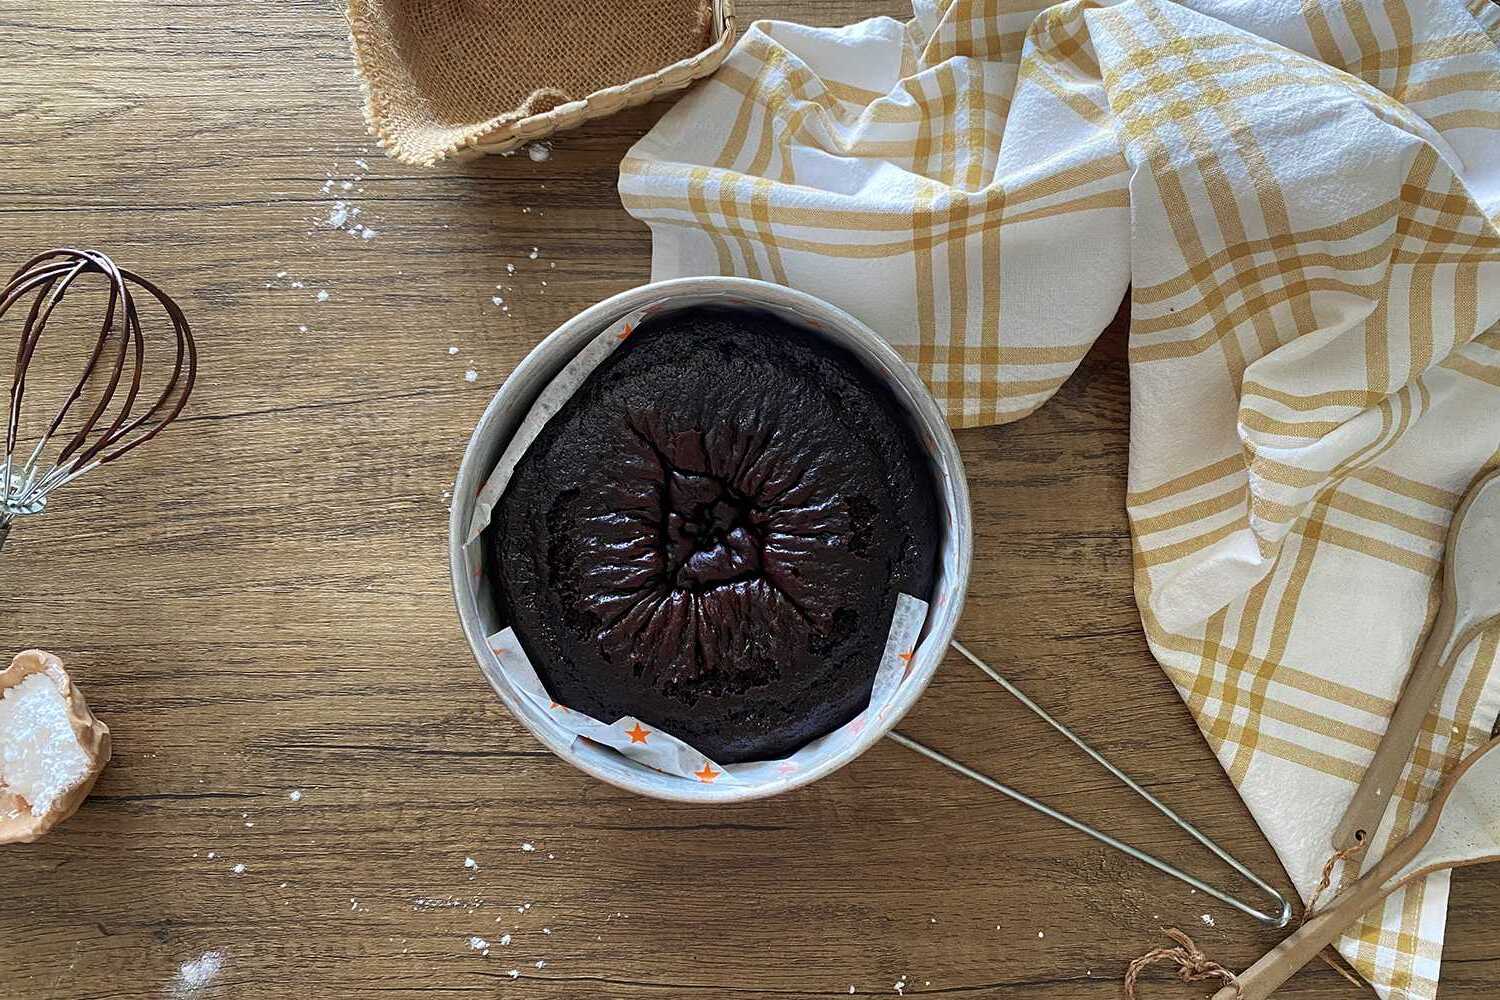 https://homepressurecooking.com/wp-content/uploads/2017/06/How-to-make-a-box-cake-in-the-pressure-cooker.jpg